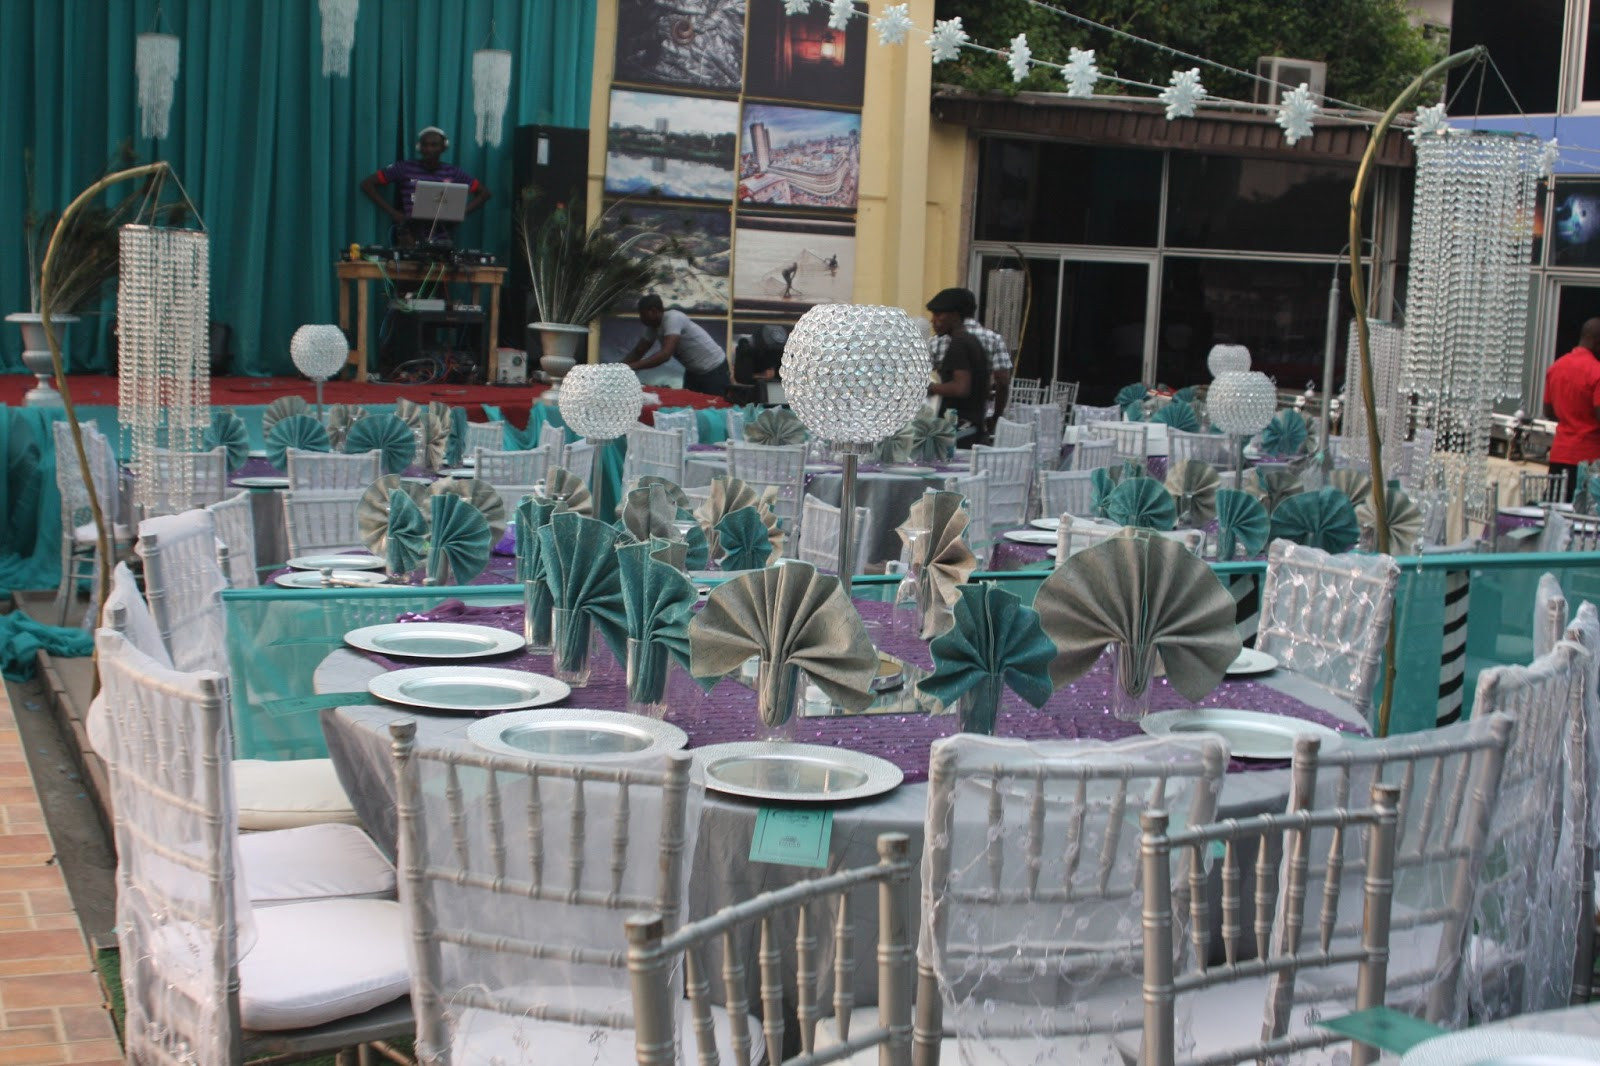 Teal Wedding Decorations
 AQUARIAN TOUCH EVENTS NG PURPLE TEAL& SILVER WEDDING DINNER